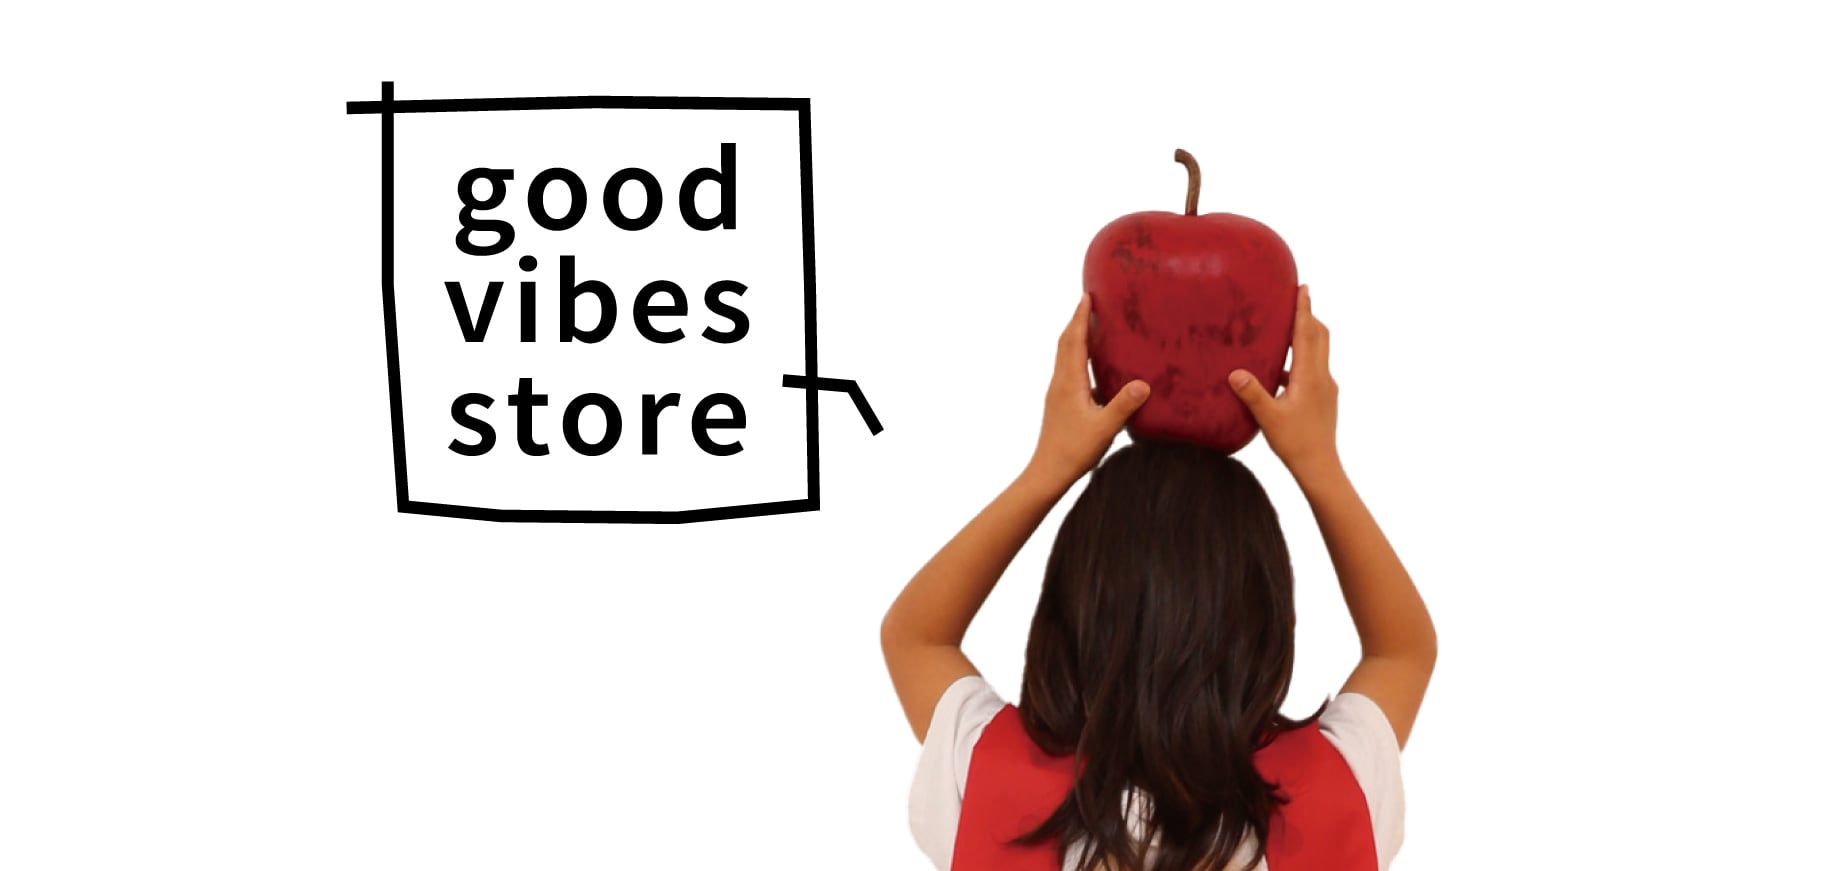 good vibes store